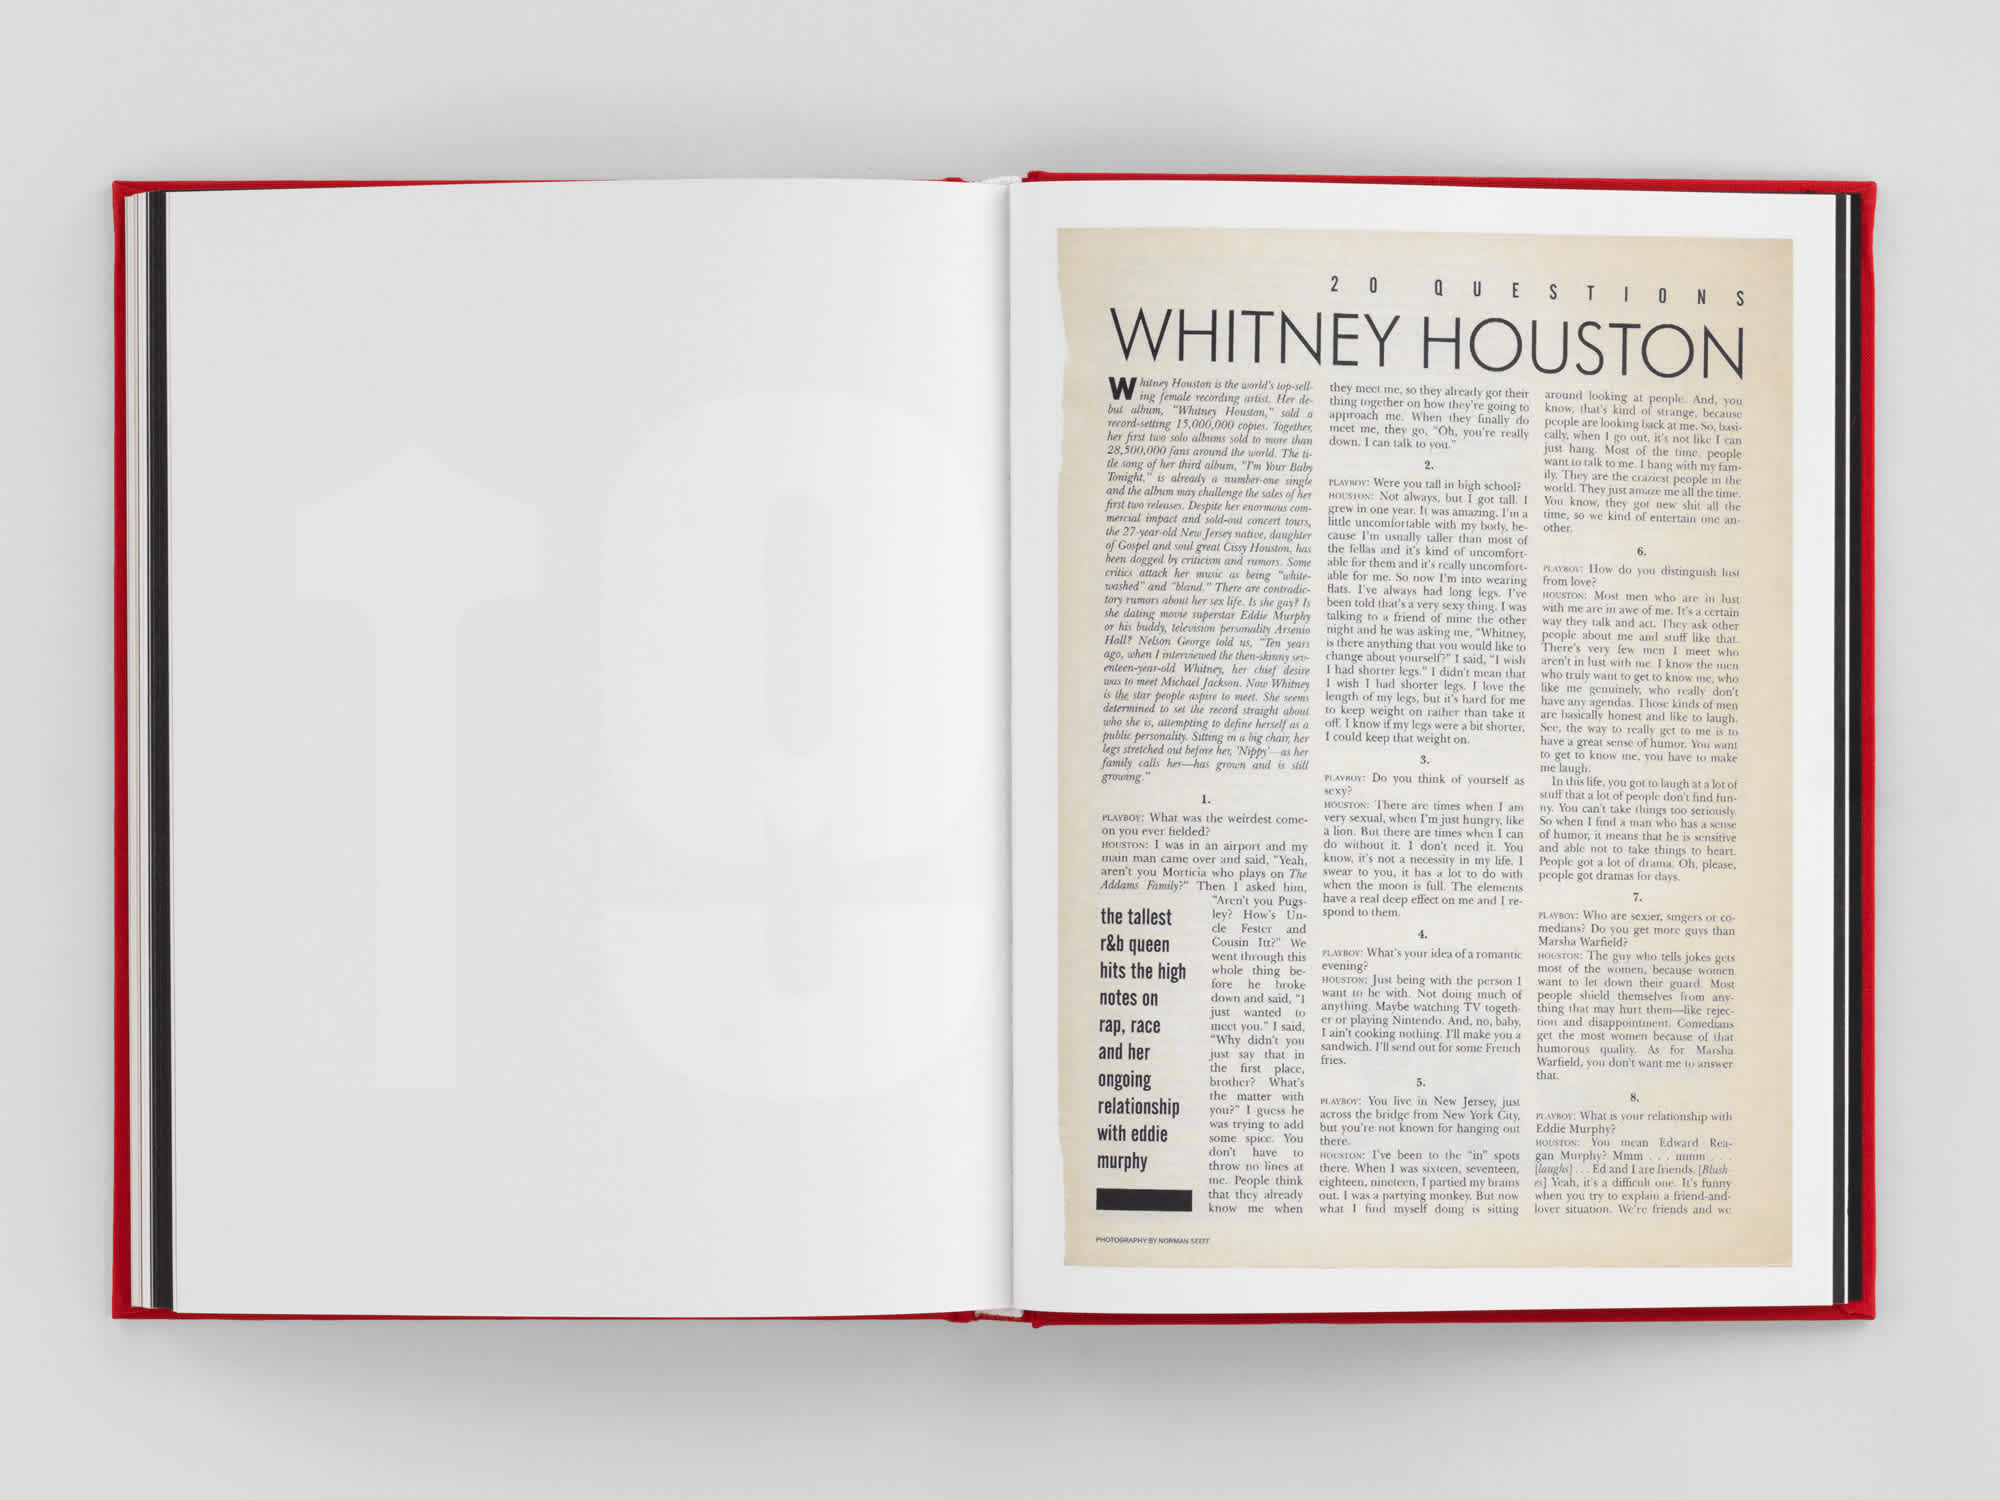 Open book with blank left page. Yellowed newspaper article about 'Whitney Houston' occupies the right.